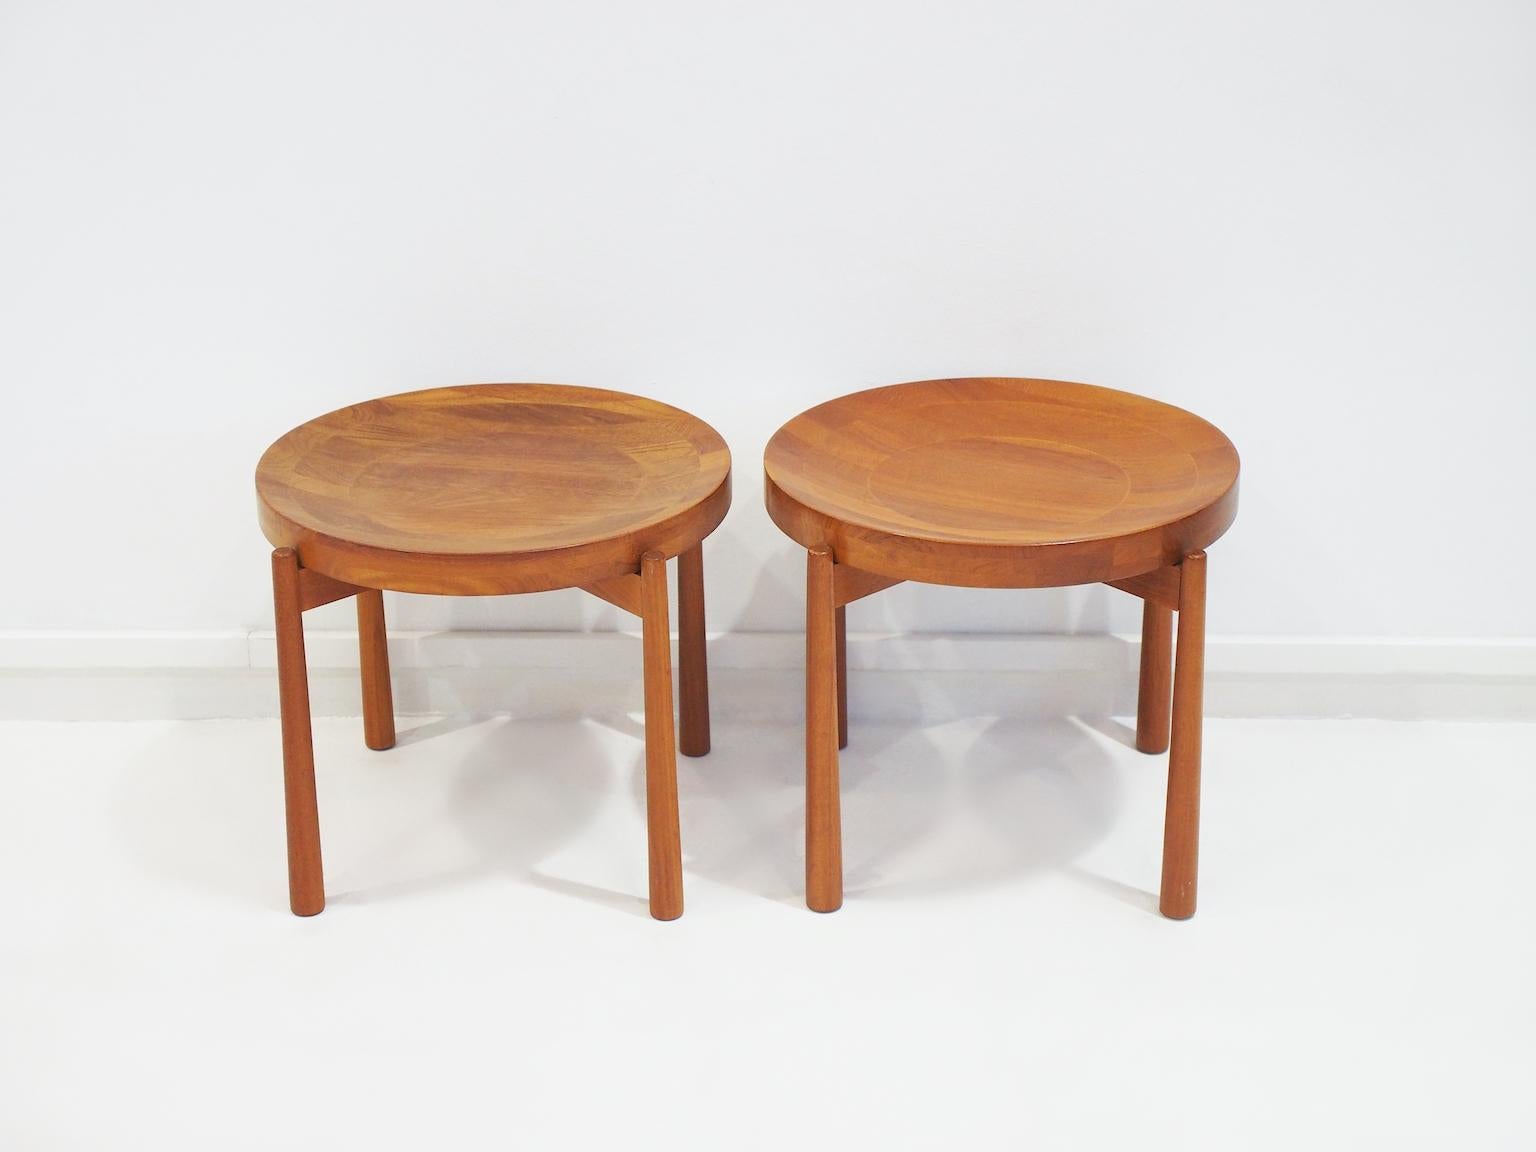 Scandinavian Modern Pair of Round Teak Tray Tables Attributed to Jens Harald Quistgaard For Sale